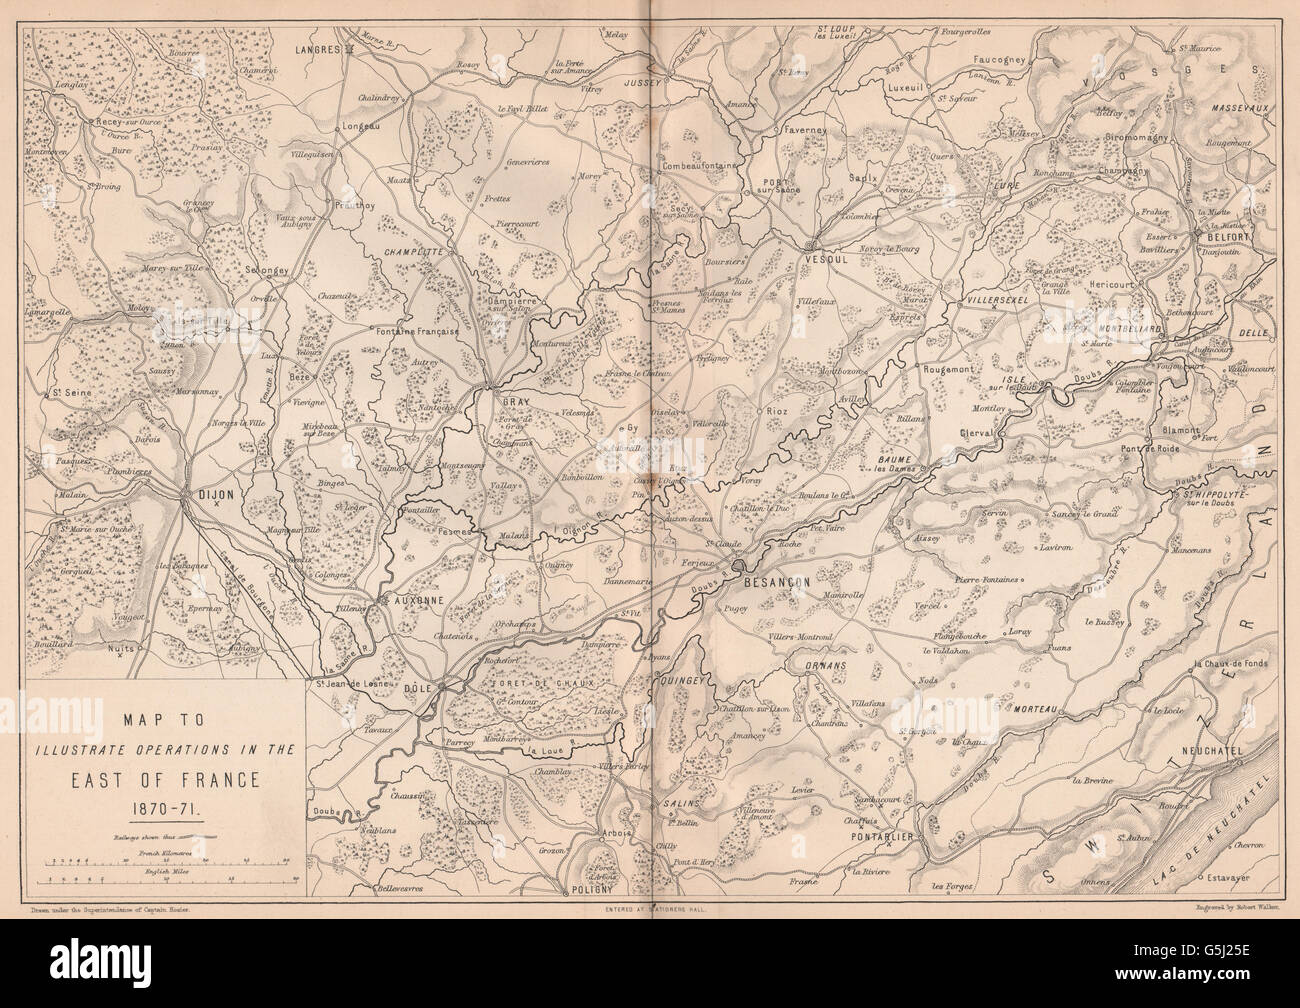 FRANCO-PRUSSIAN WAR 1870-71: Operations in Franche-Comté & Burgundy, 1875 map Stock Photo